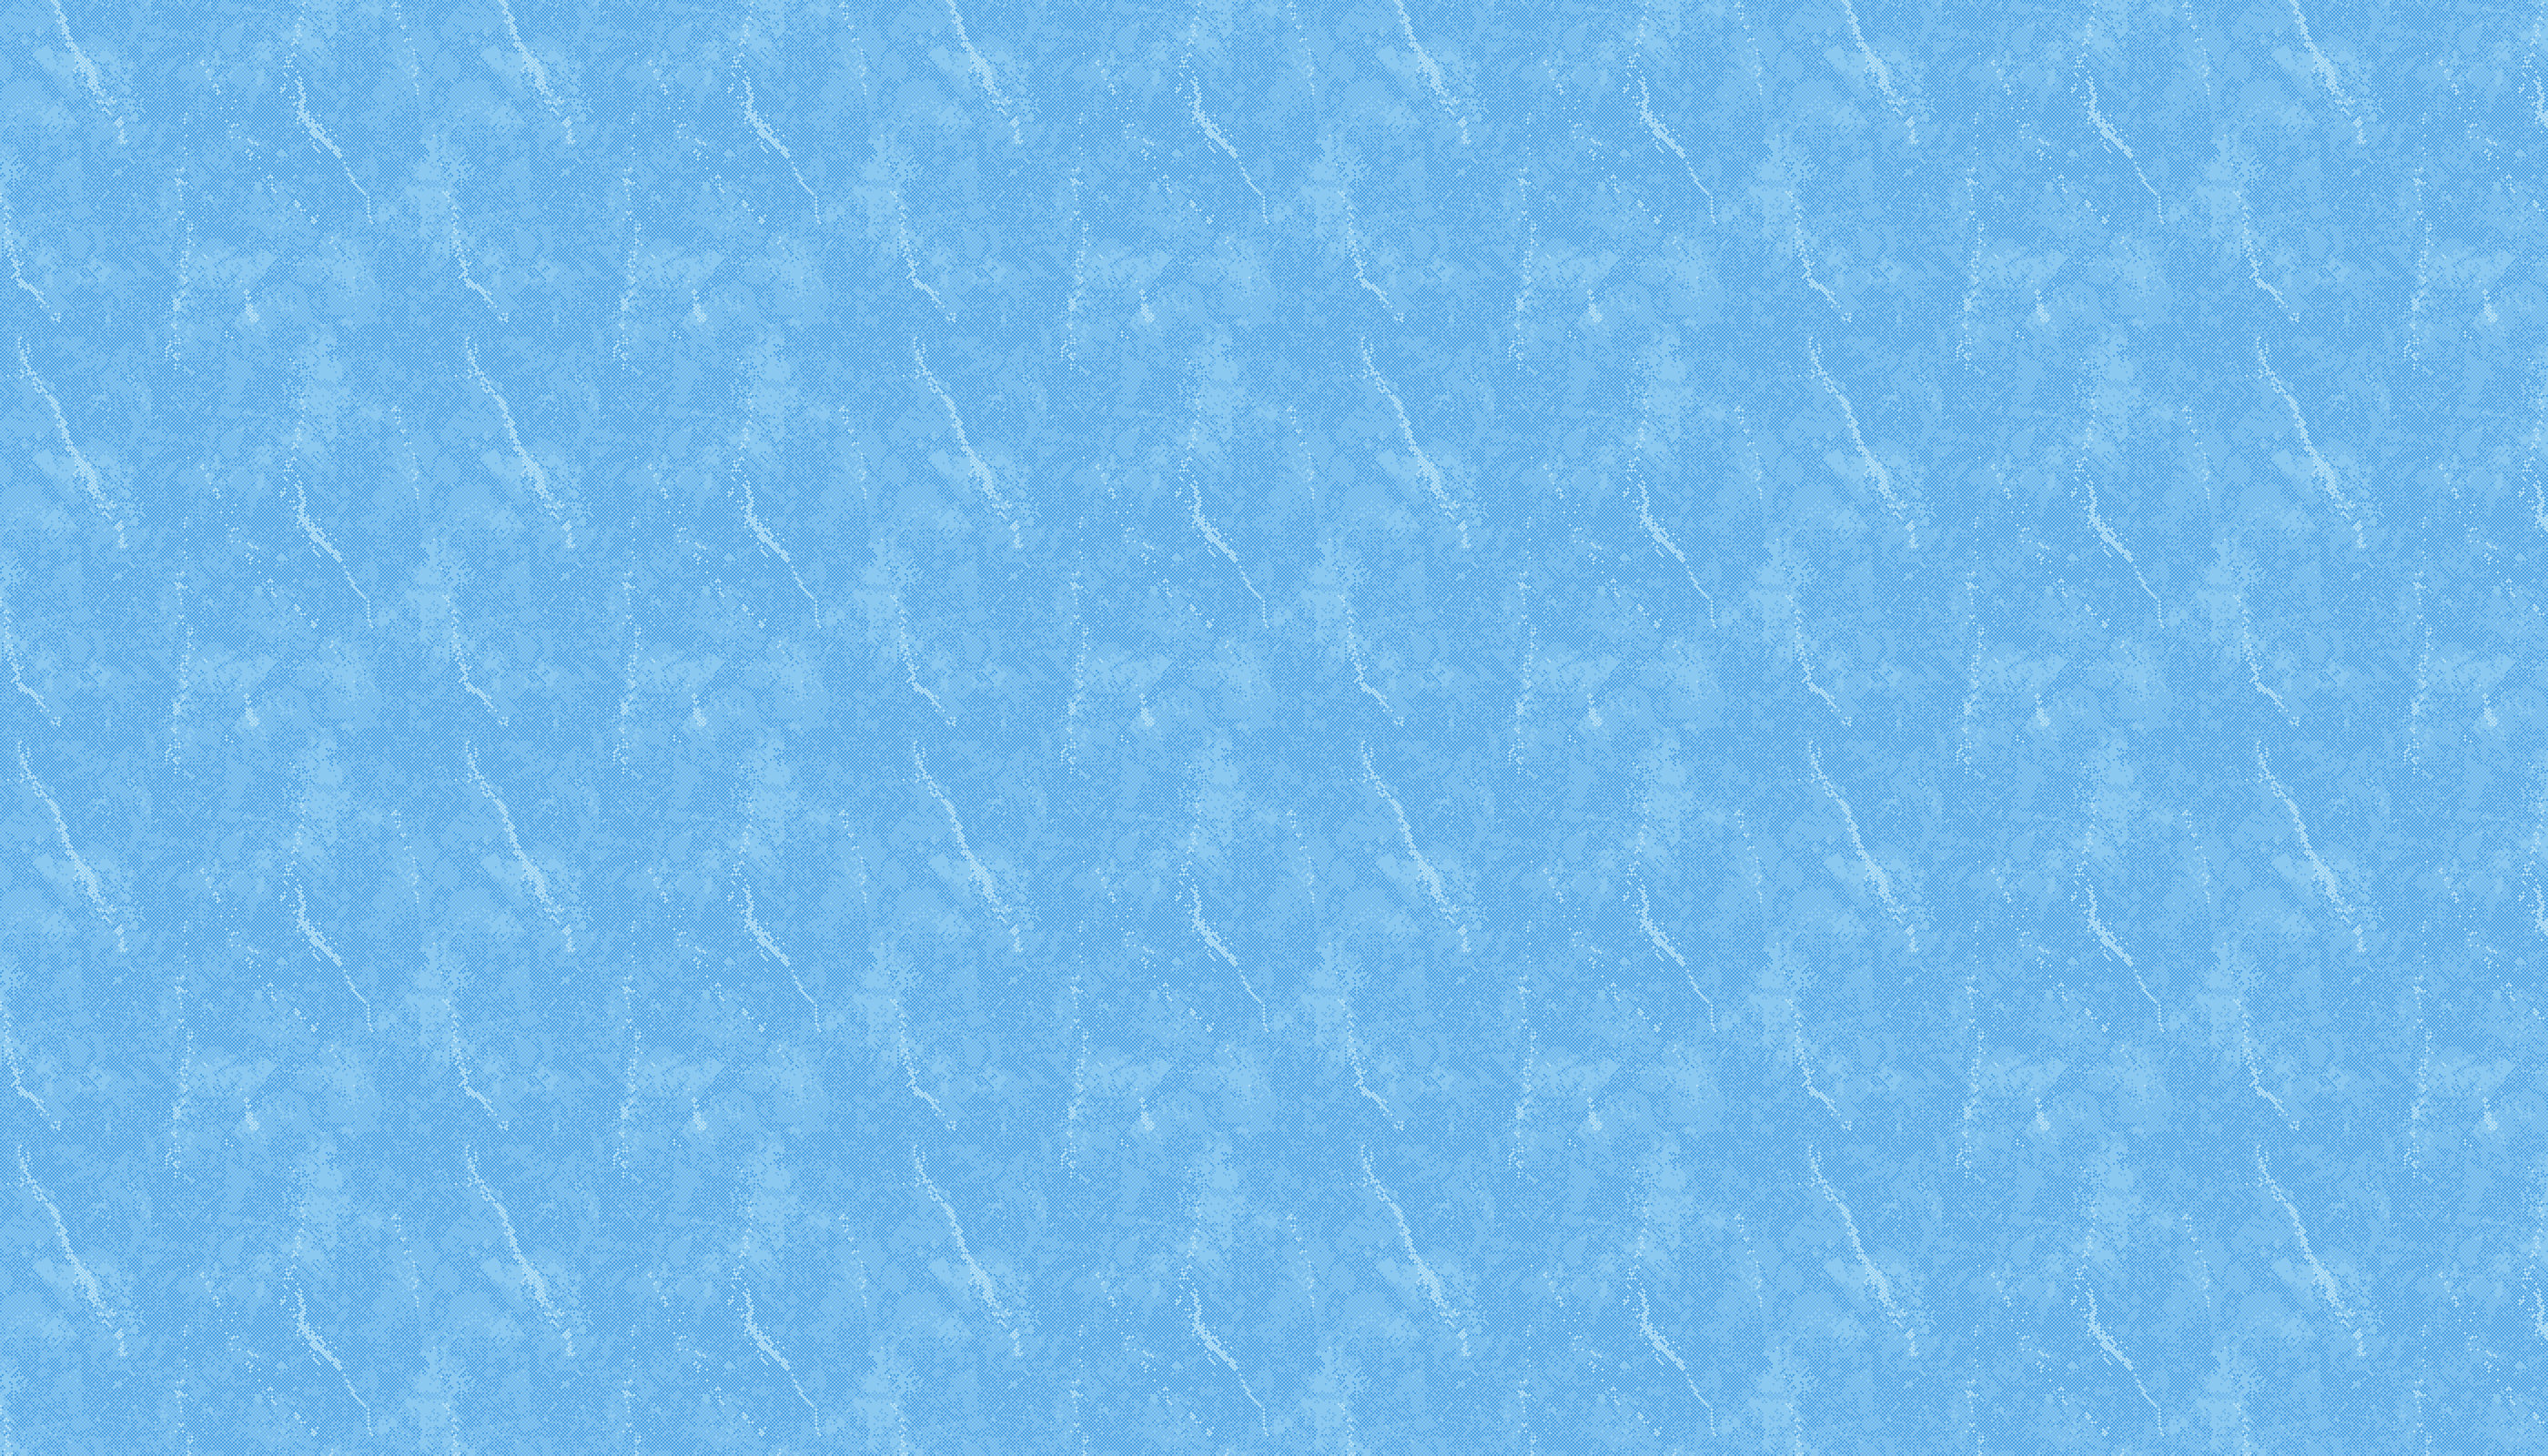 General 2800x1600 pattern blue abstract